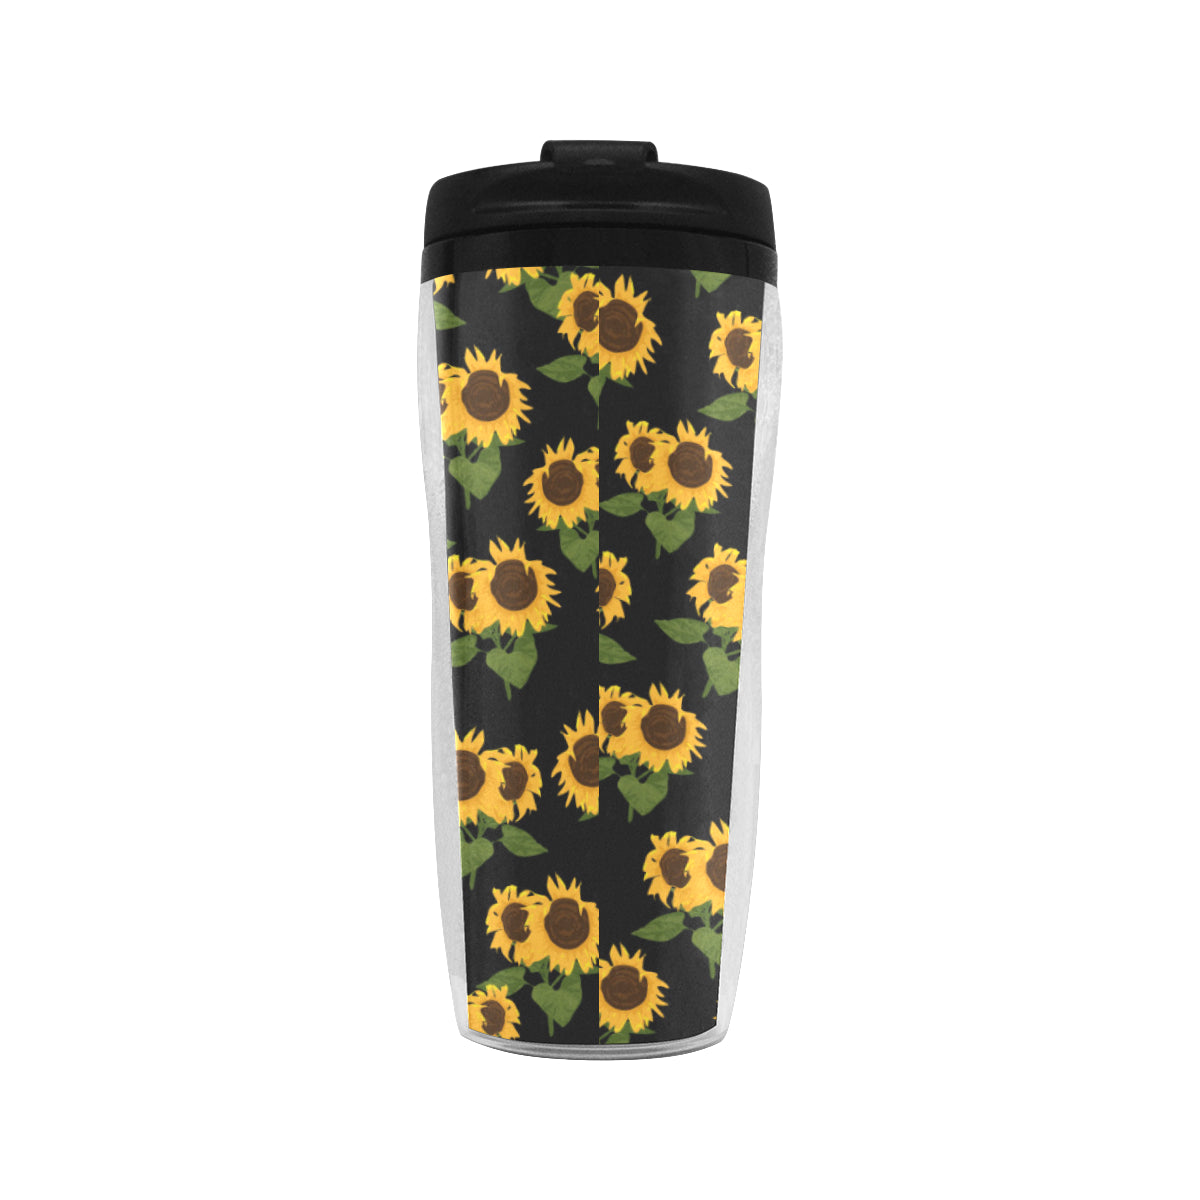 Sunflower Insulated Tumbler, Flower Floral Coffee Mug Reusable Coffee Cup (11 OZ) Travel with Wrap & Lid Gift Starcove Fashion